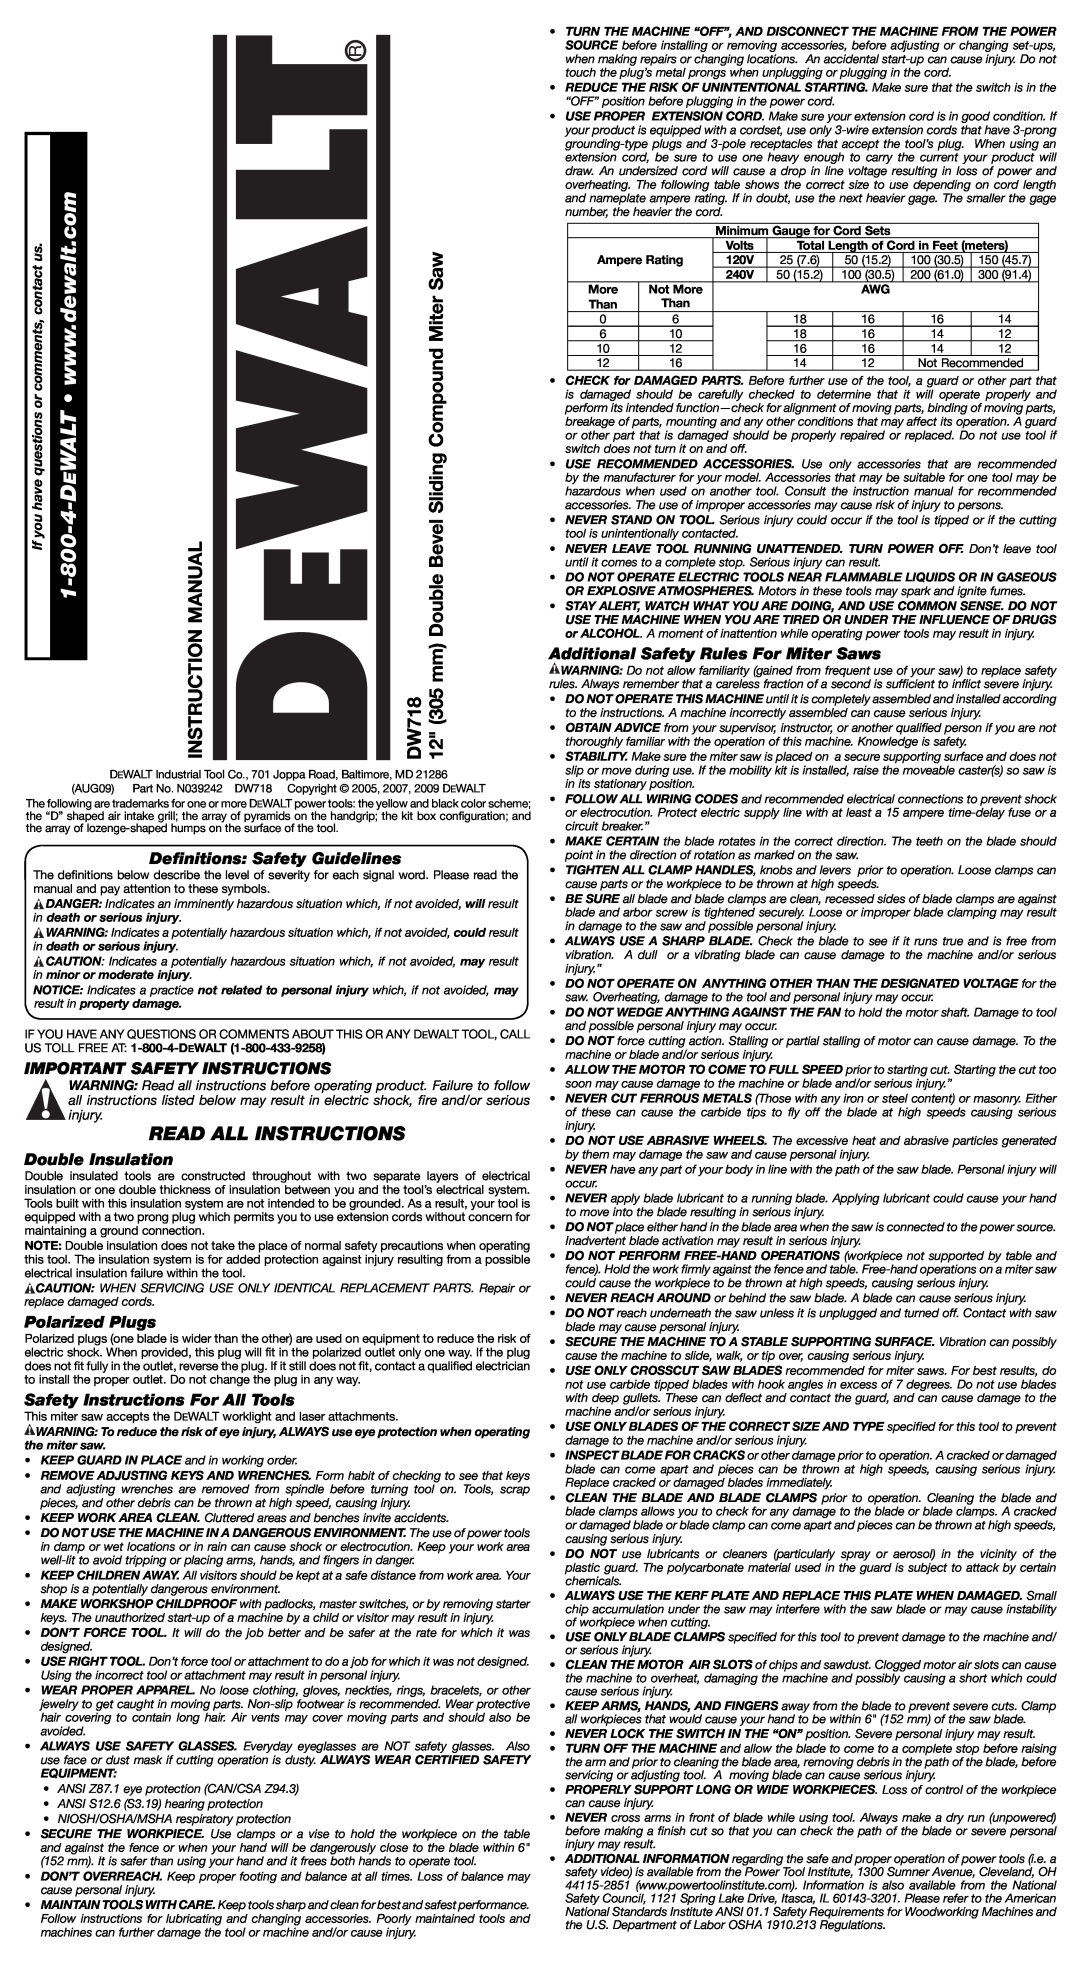 DeWalt DW7187, DW 718 instruction manual Definitions Safety Guidelines, Important Safety Instructions, Double Insulation 